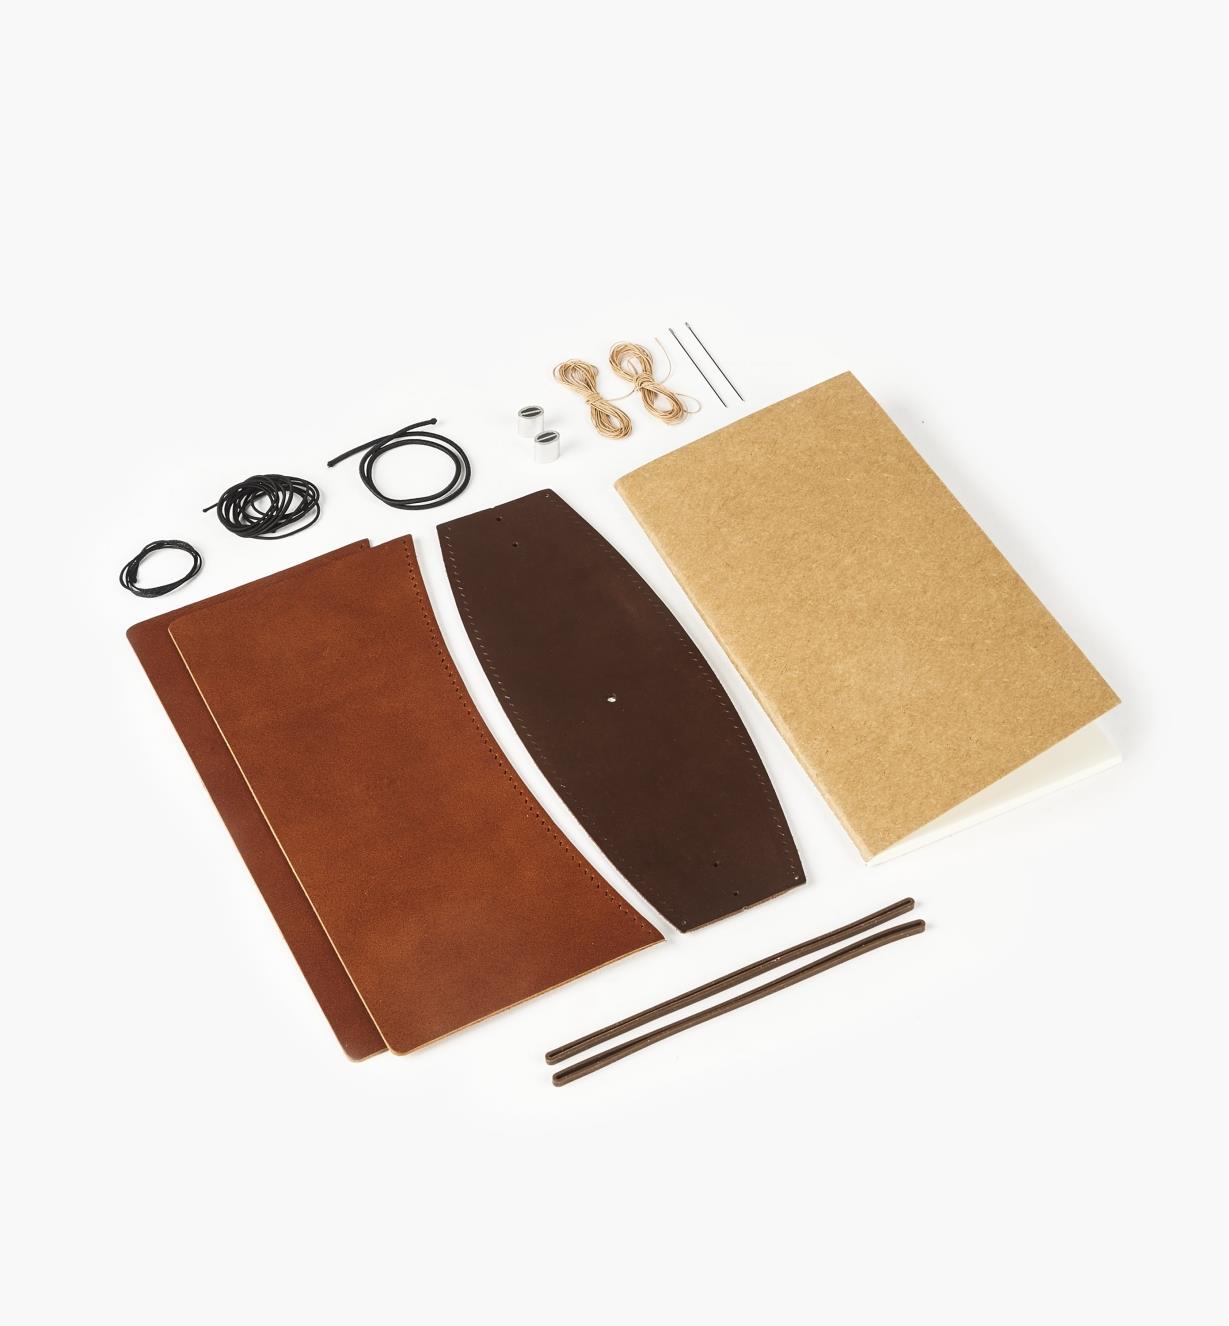 09A1060 - Premium Leathercraft Notebook Cover Kit